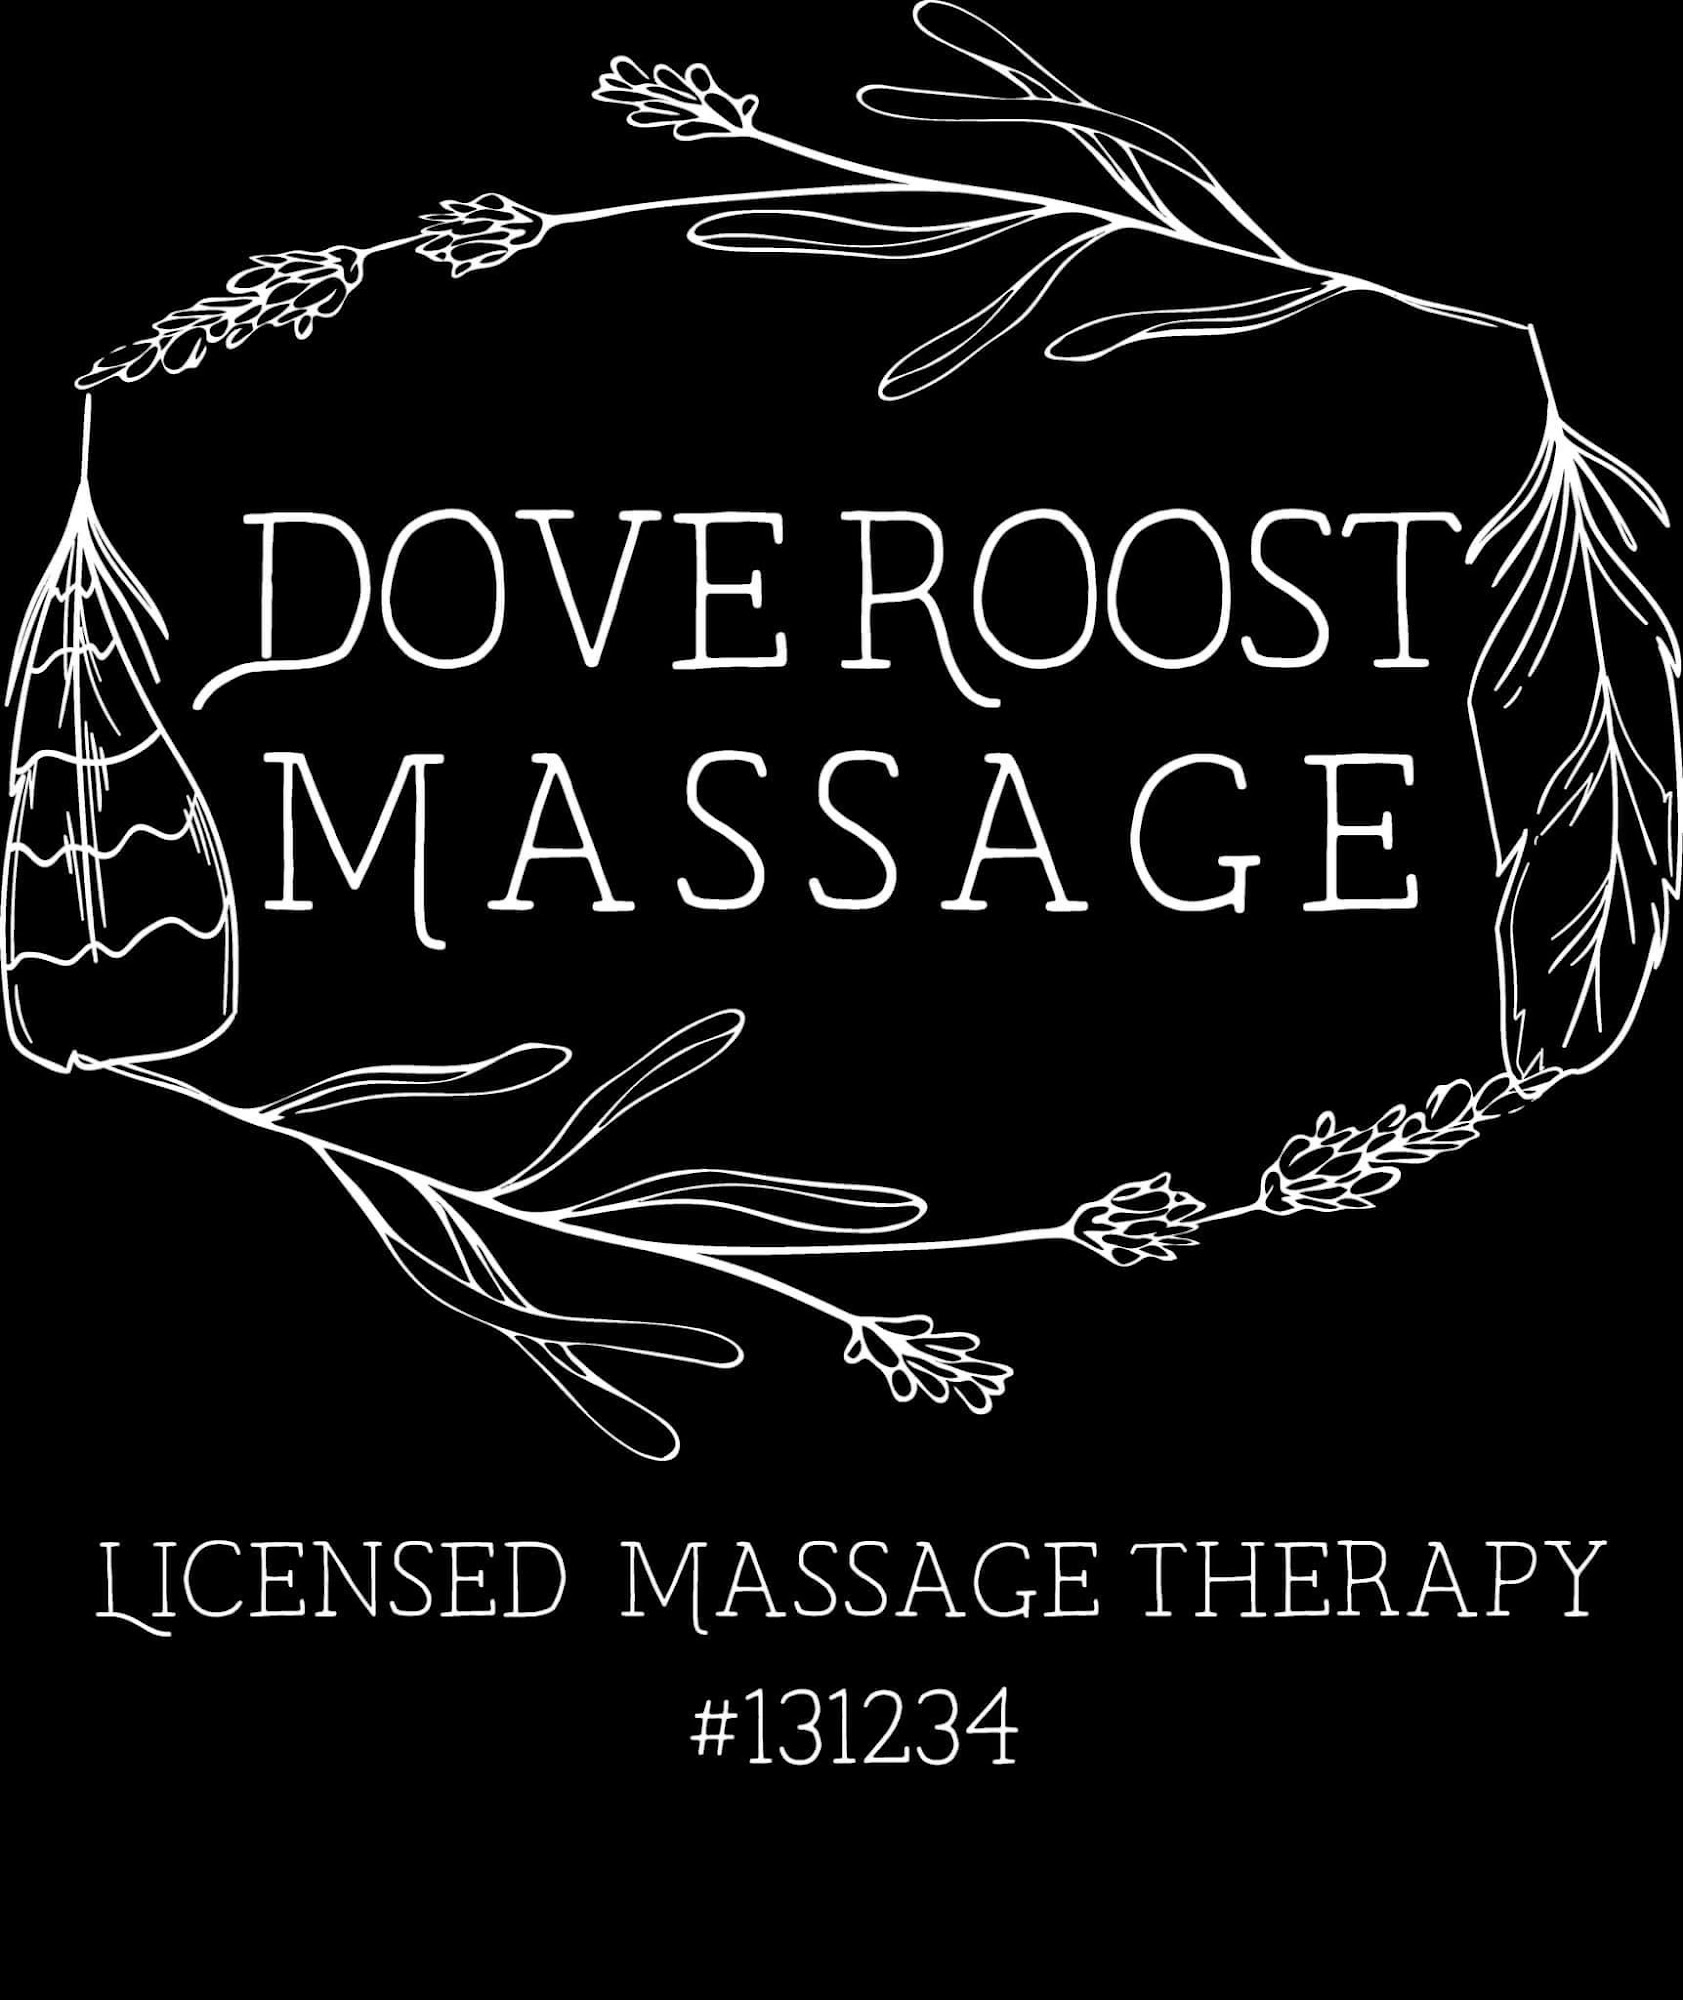 Dove Roost Licensed Massage Therapy LMT131234 308 N Austin St, Comanche Texas 76442